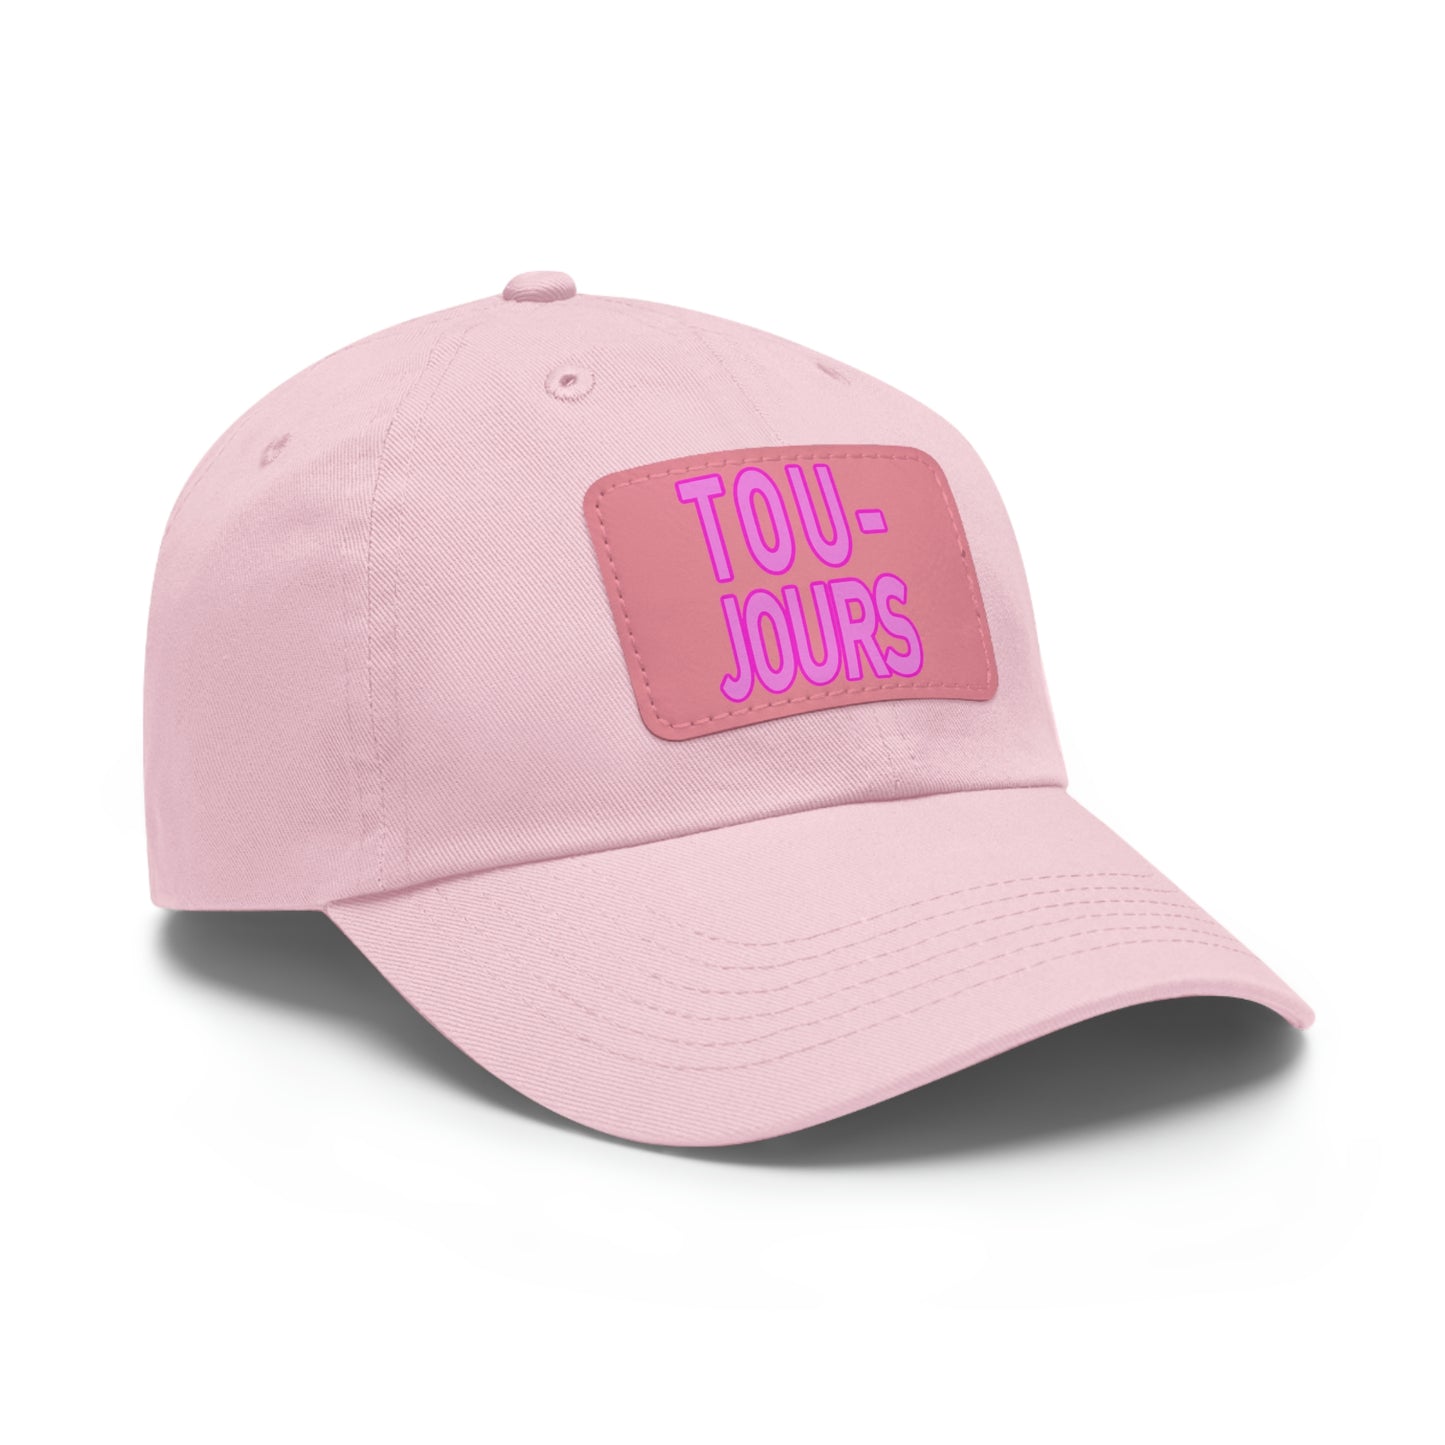 TOUJOURS Leather Patch Cap Pink